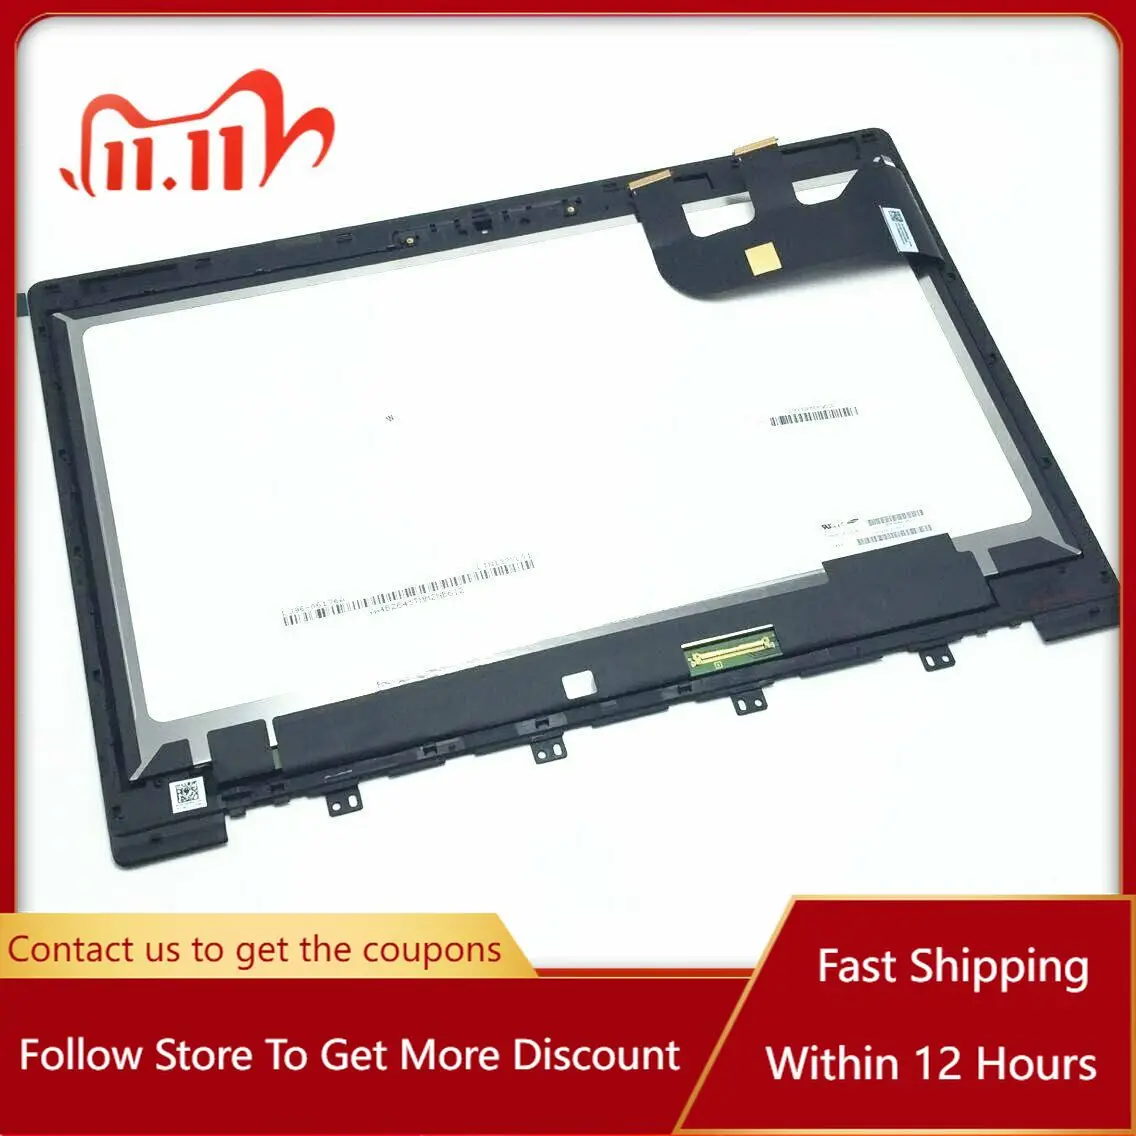 

FHD QHD LCD Screen Display Panel Touch Digitizer Glass Assembly with Bezel for Asus Zenbook UX303 UX303U UX303UA UX303UB UX303LN